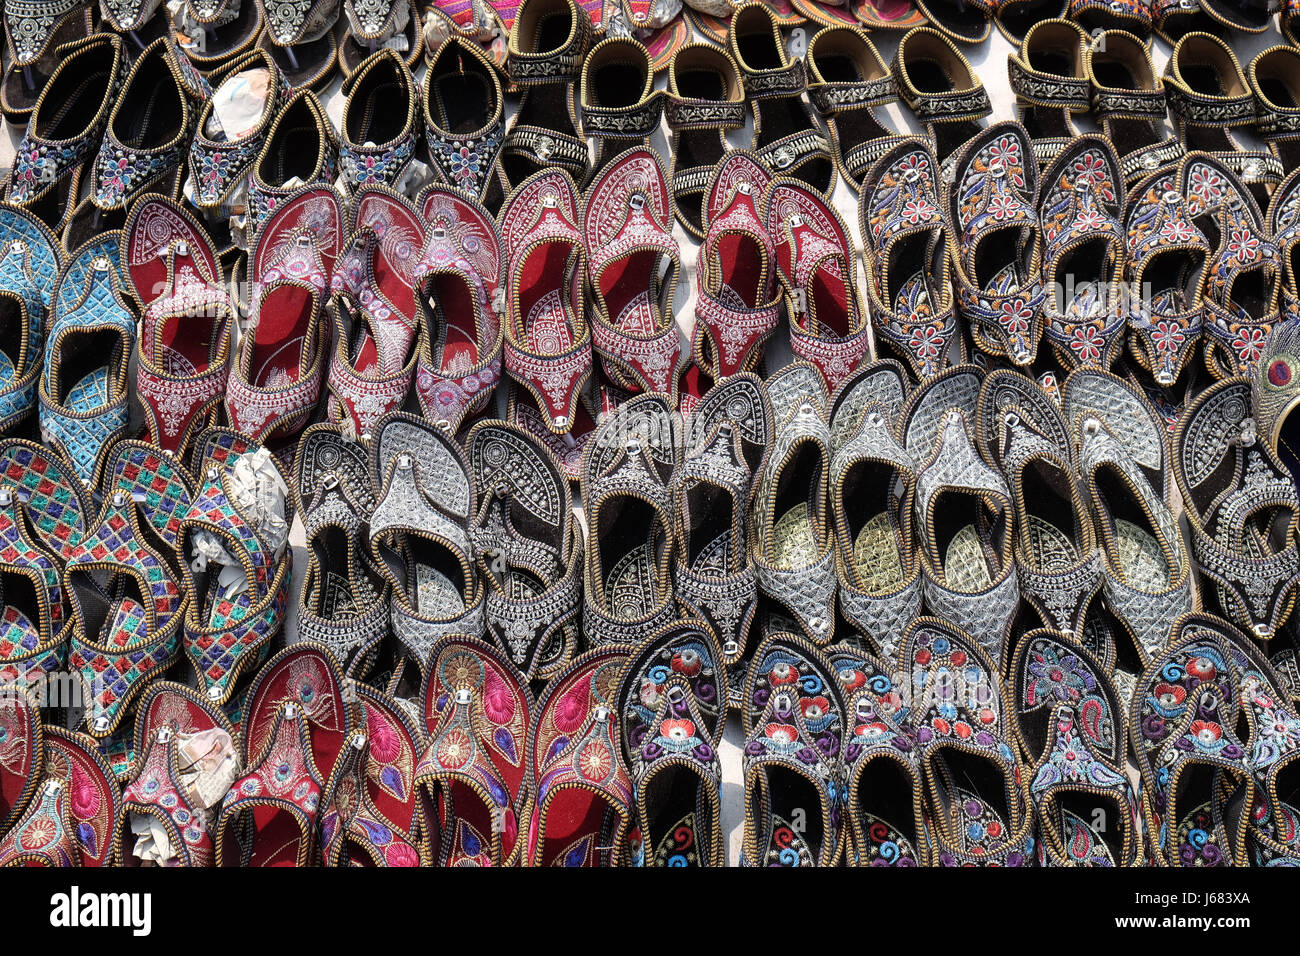 Display of traditional shoes at the street market in Jaipur. Jaipur is the capital and the biggest city of Rajasthan, India Stock Photo